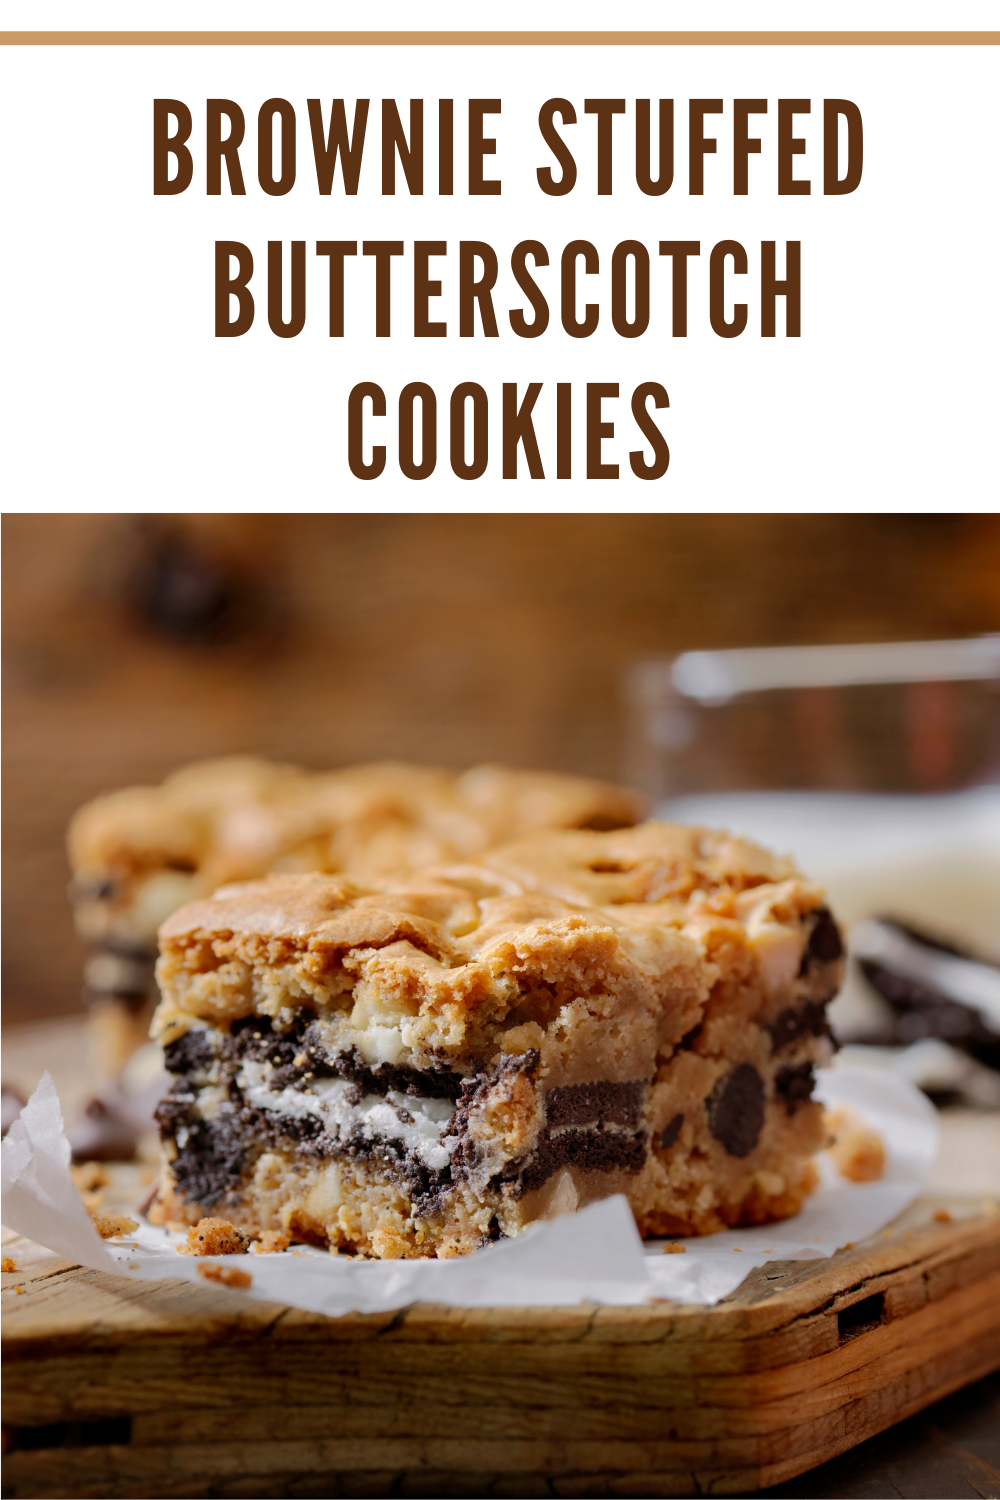 What happens when brownies and butterscotch cookies collide? It's a tasty treat that disappears--Brownie Stuffed Butterscotch cookies!